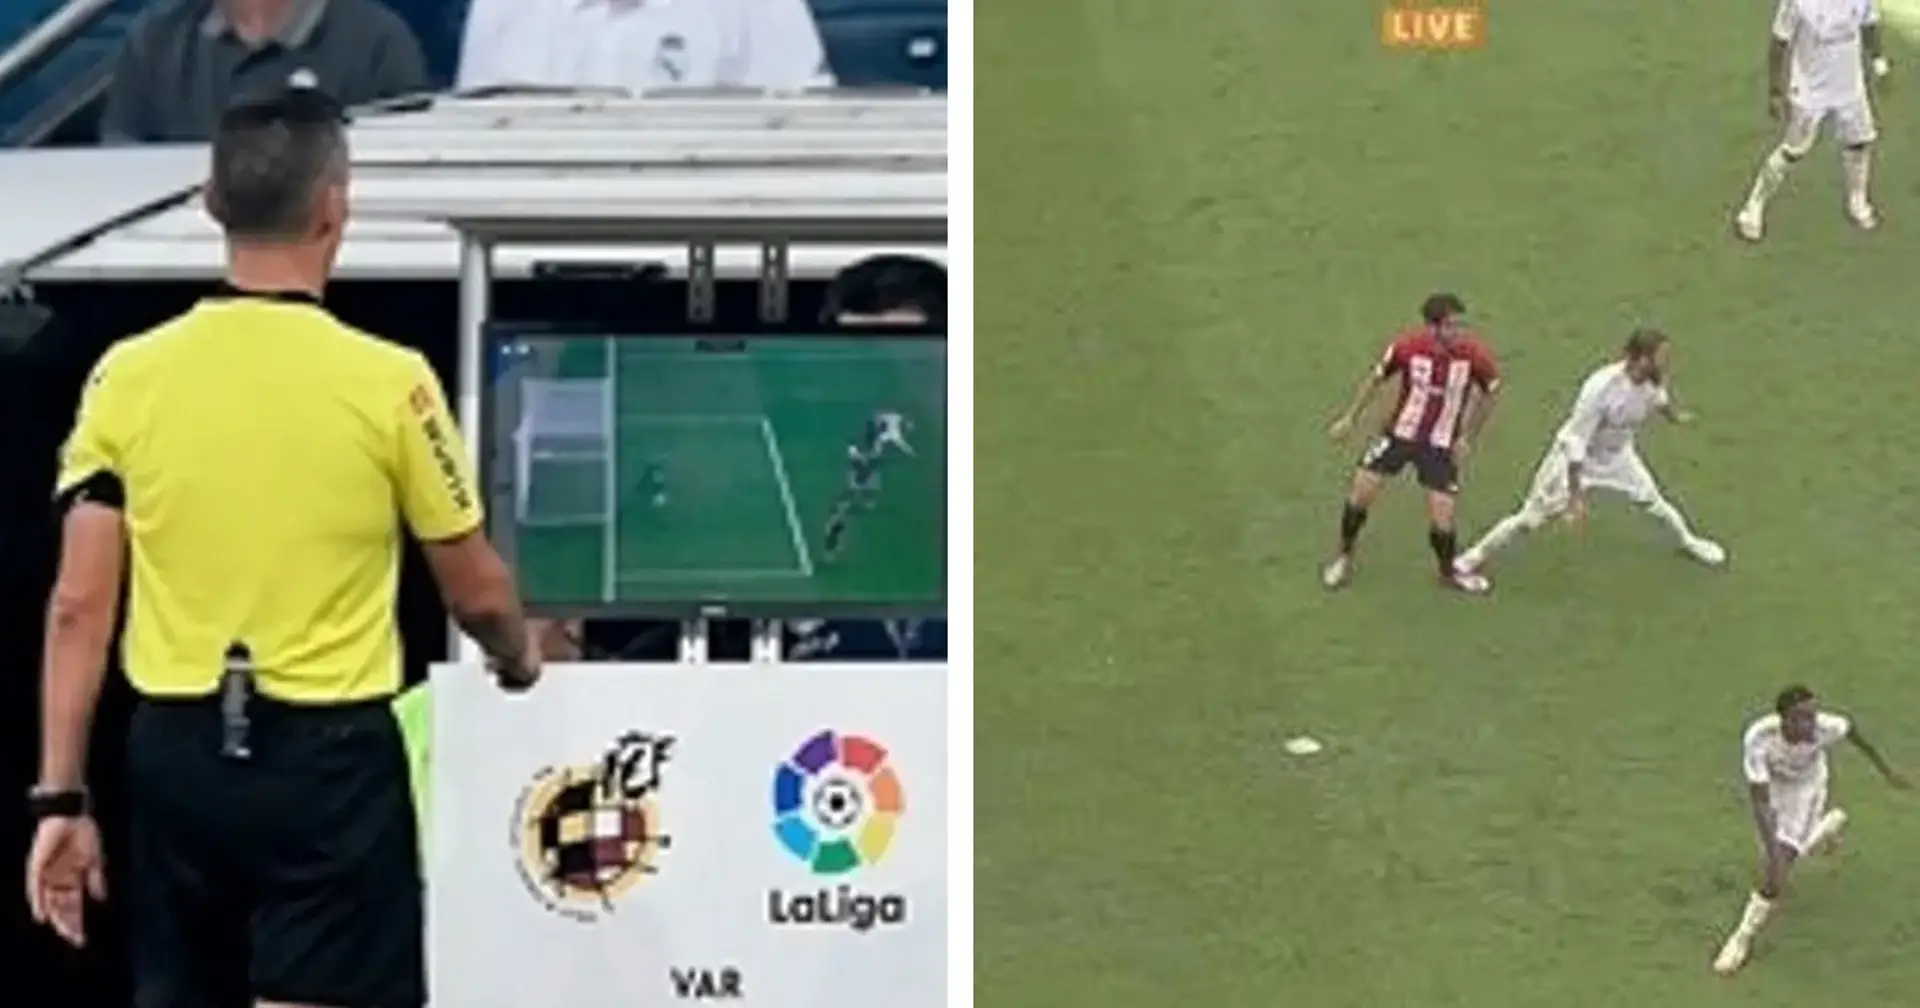 VARce in La Liga: Real Madrid escape penalty vs Athletic due to wrong translation of rules into Spanish